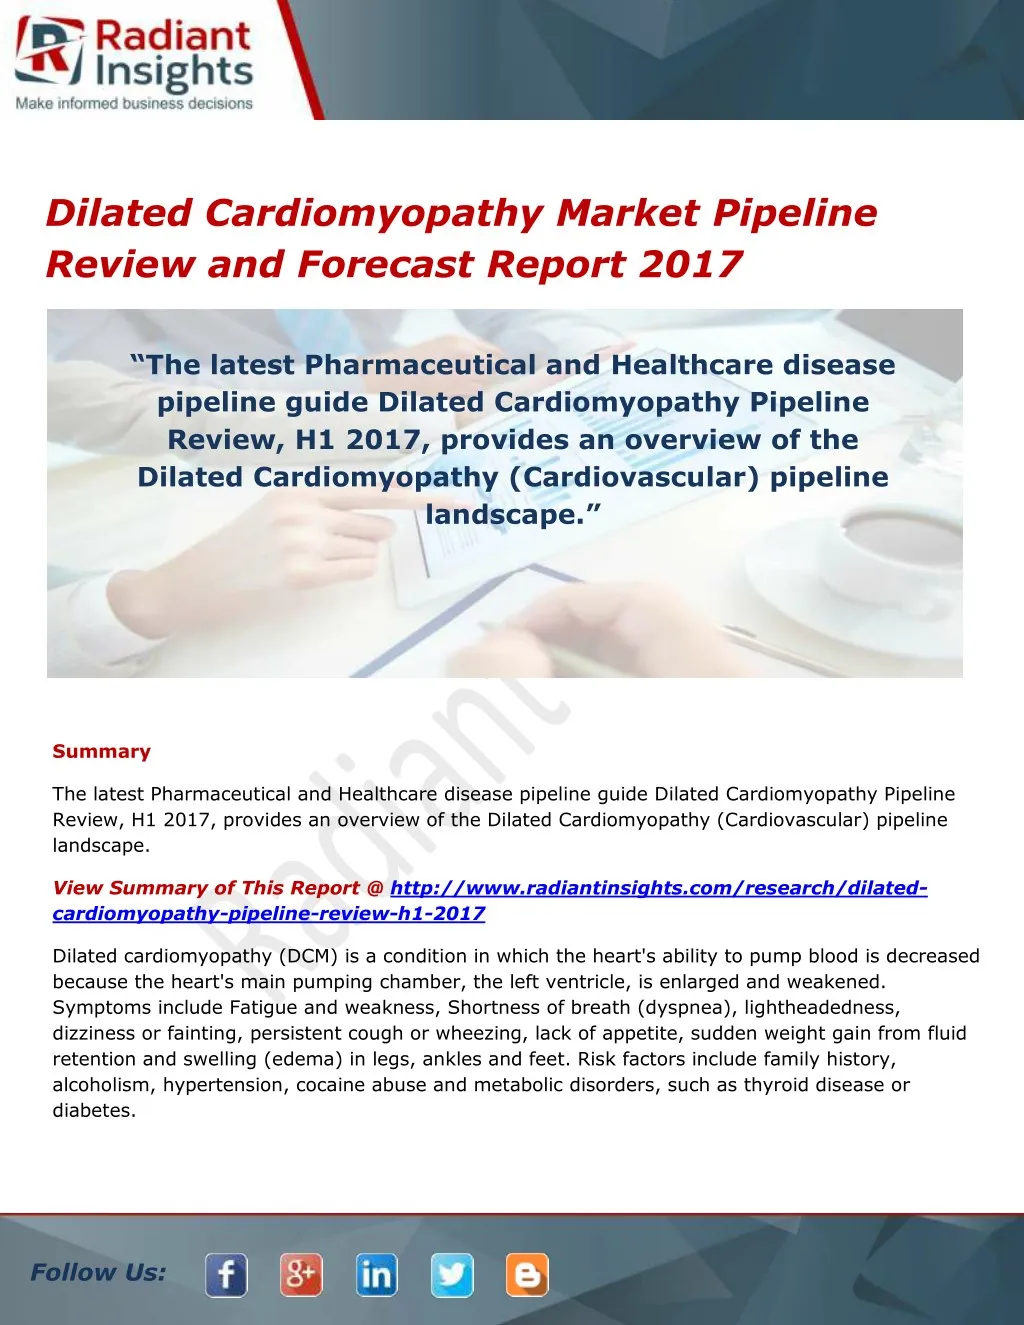 dilated cardiomyopathy market pipeline review